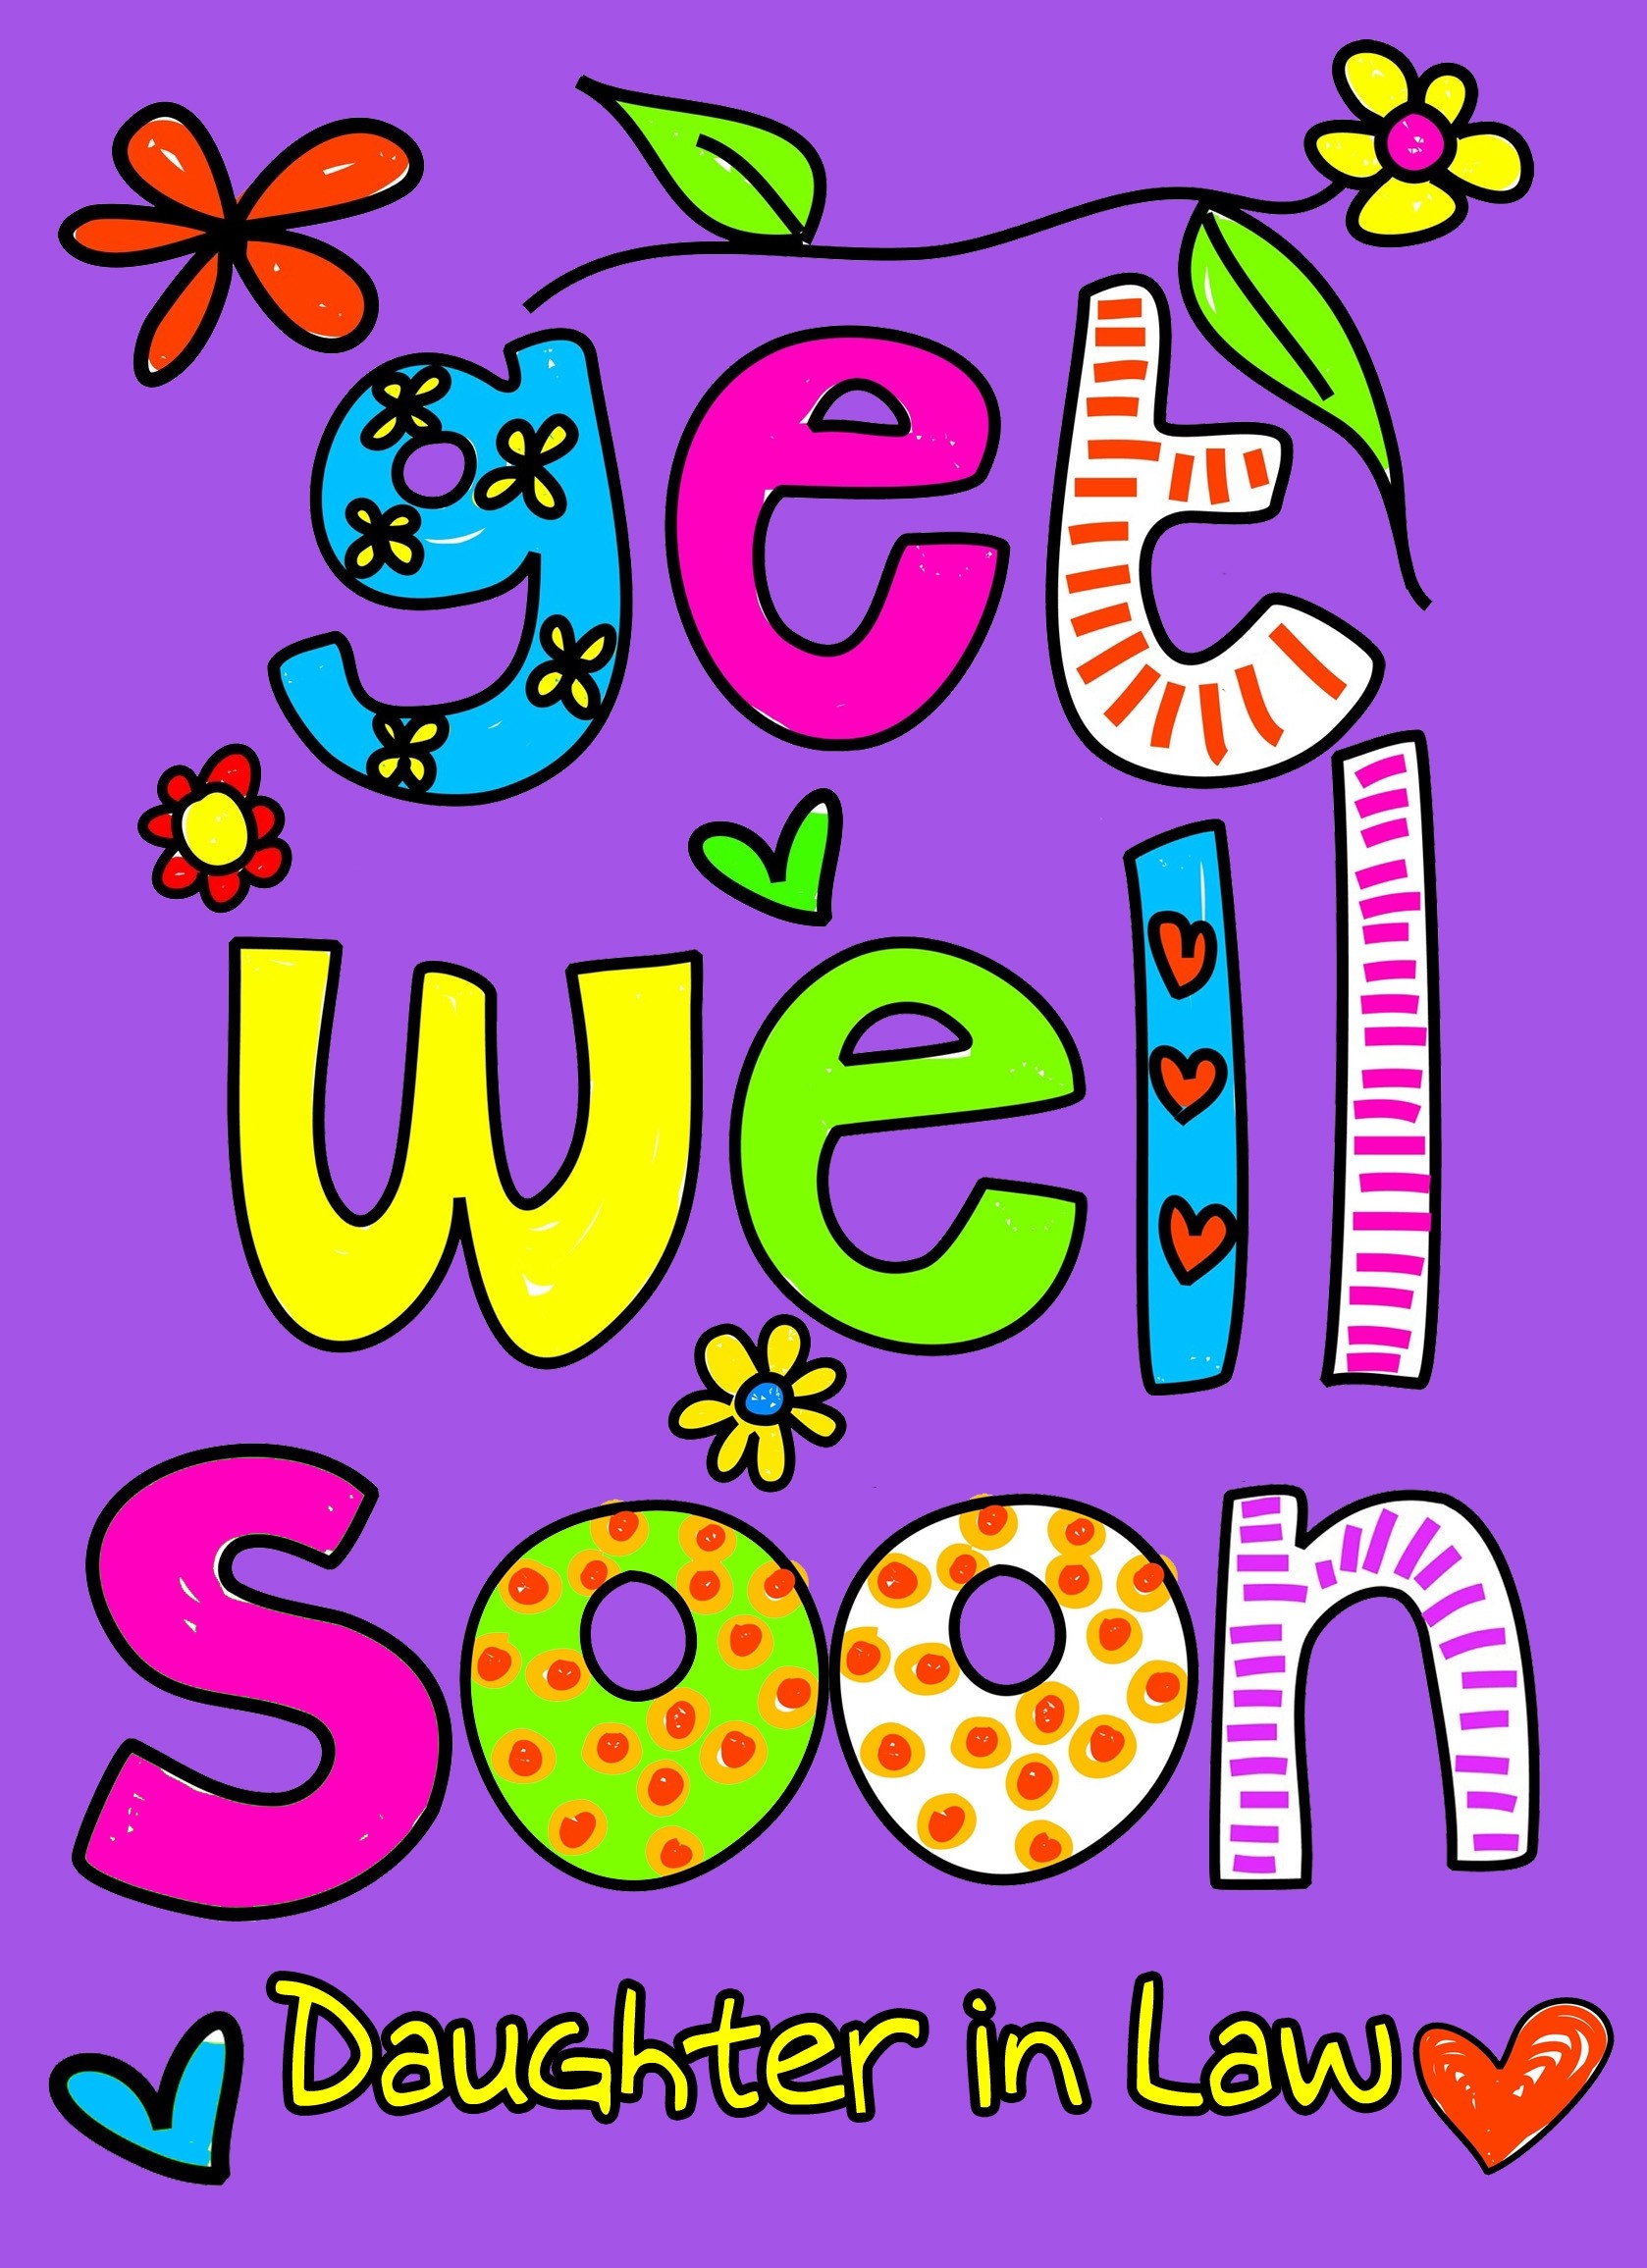 Get Well Soon 'Daughter in Law' Greeting Card